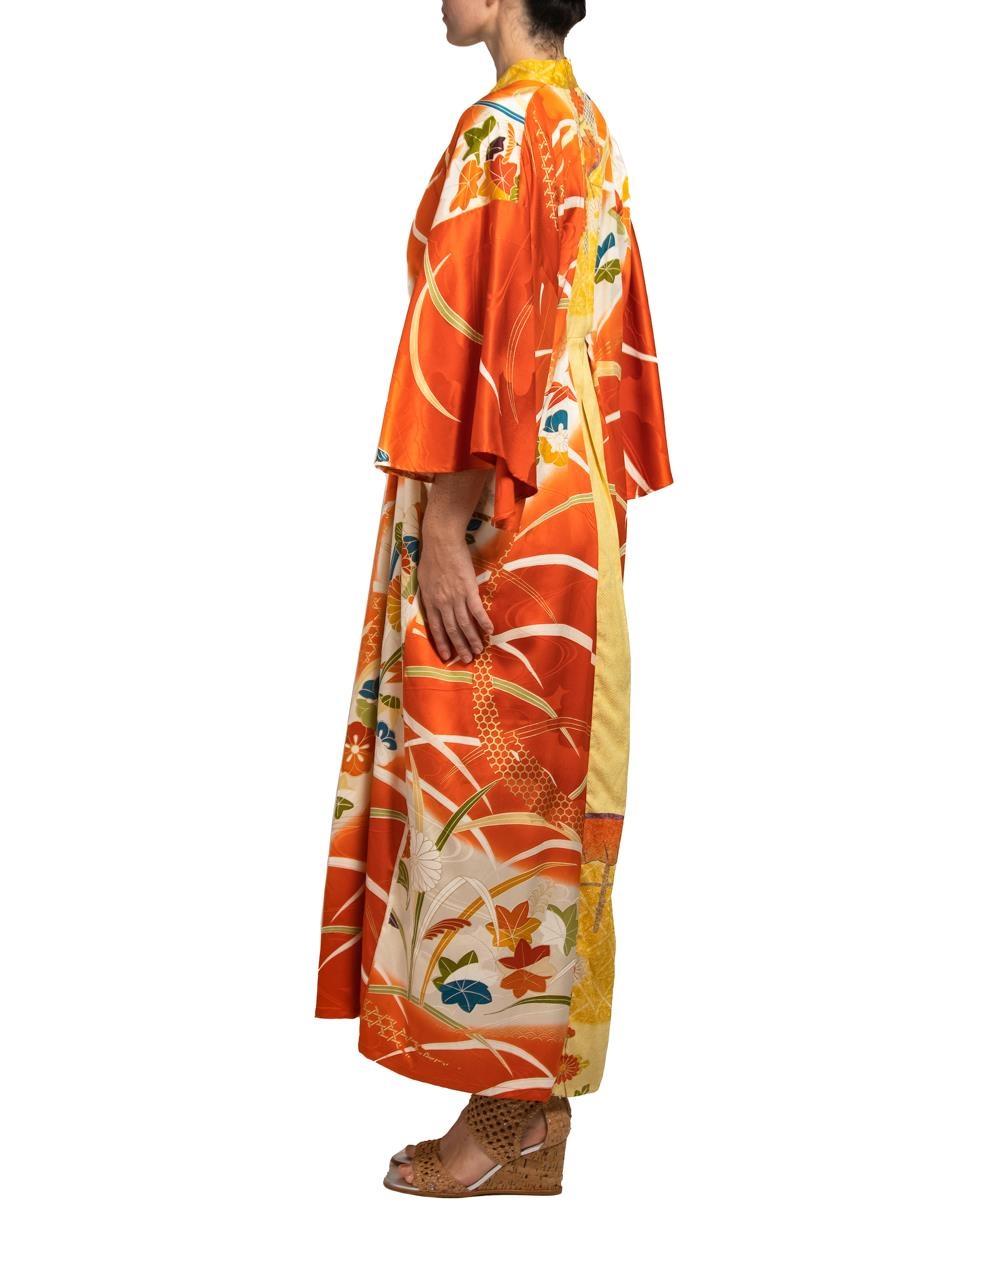 MORPHEW COLLECTION Orange & Yellow Silk Kaftan With Metallic Gold Painted Detai In Excellent Condition For Sale In New York, NY